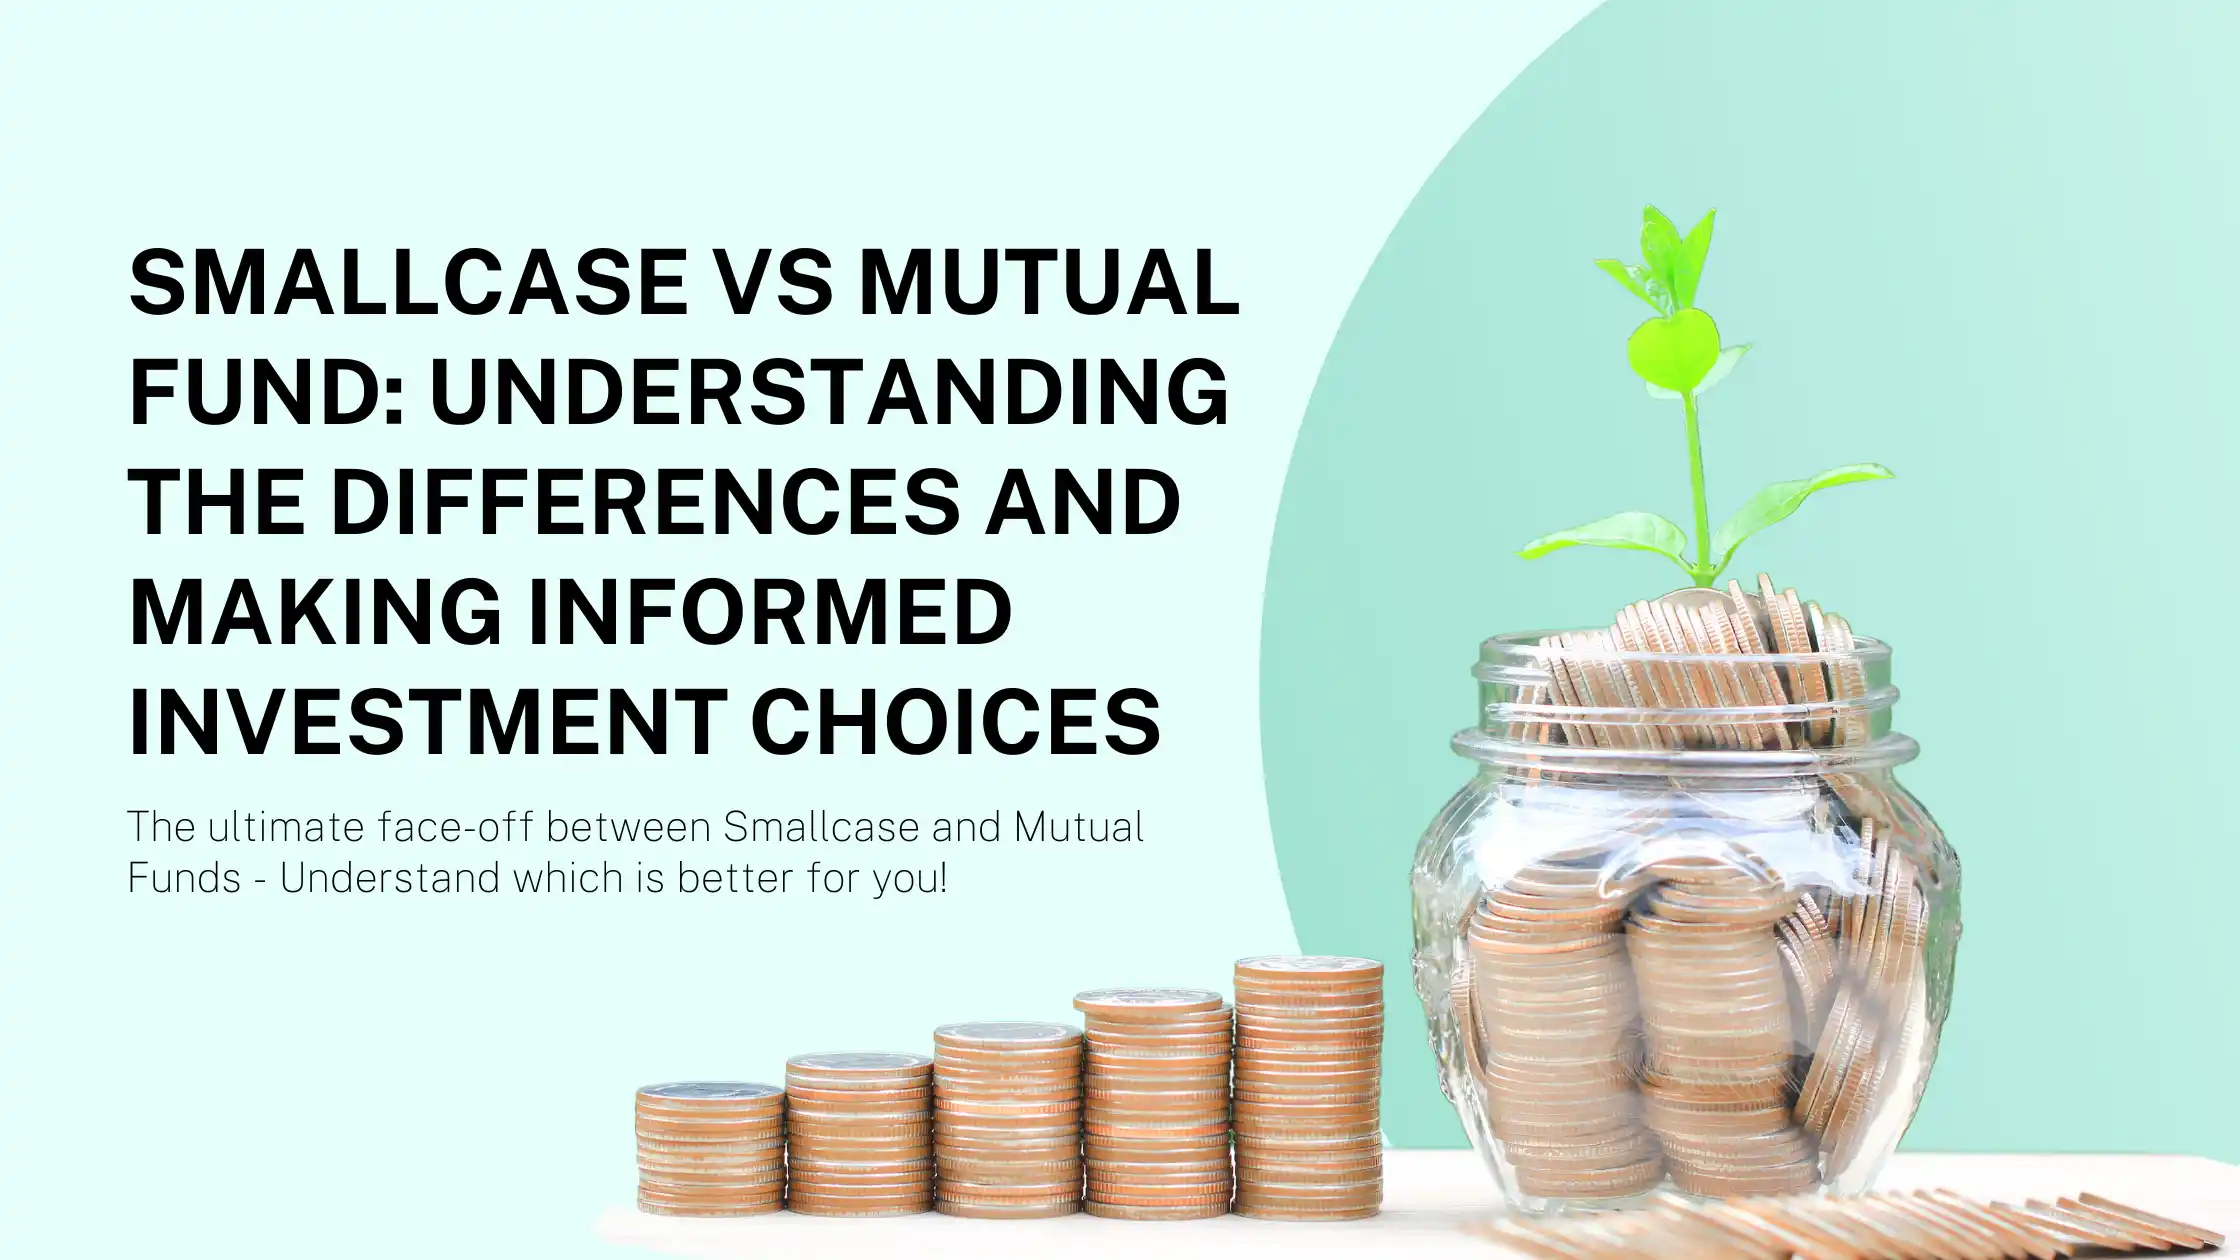 Smallcase vs Mutual Fund: Understand Difference and Similarities